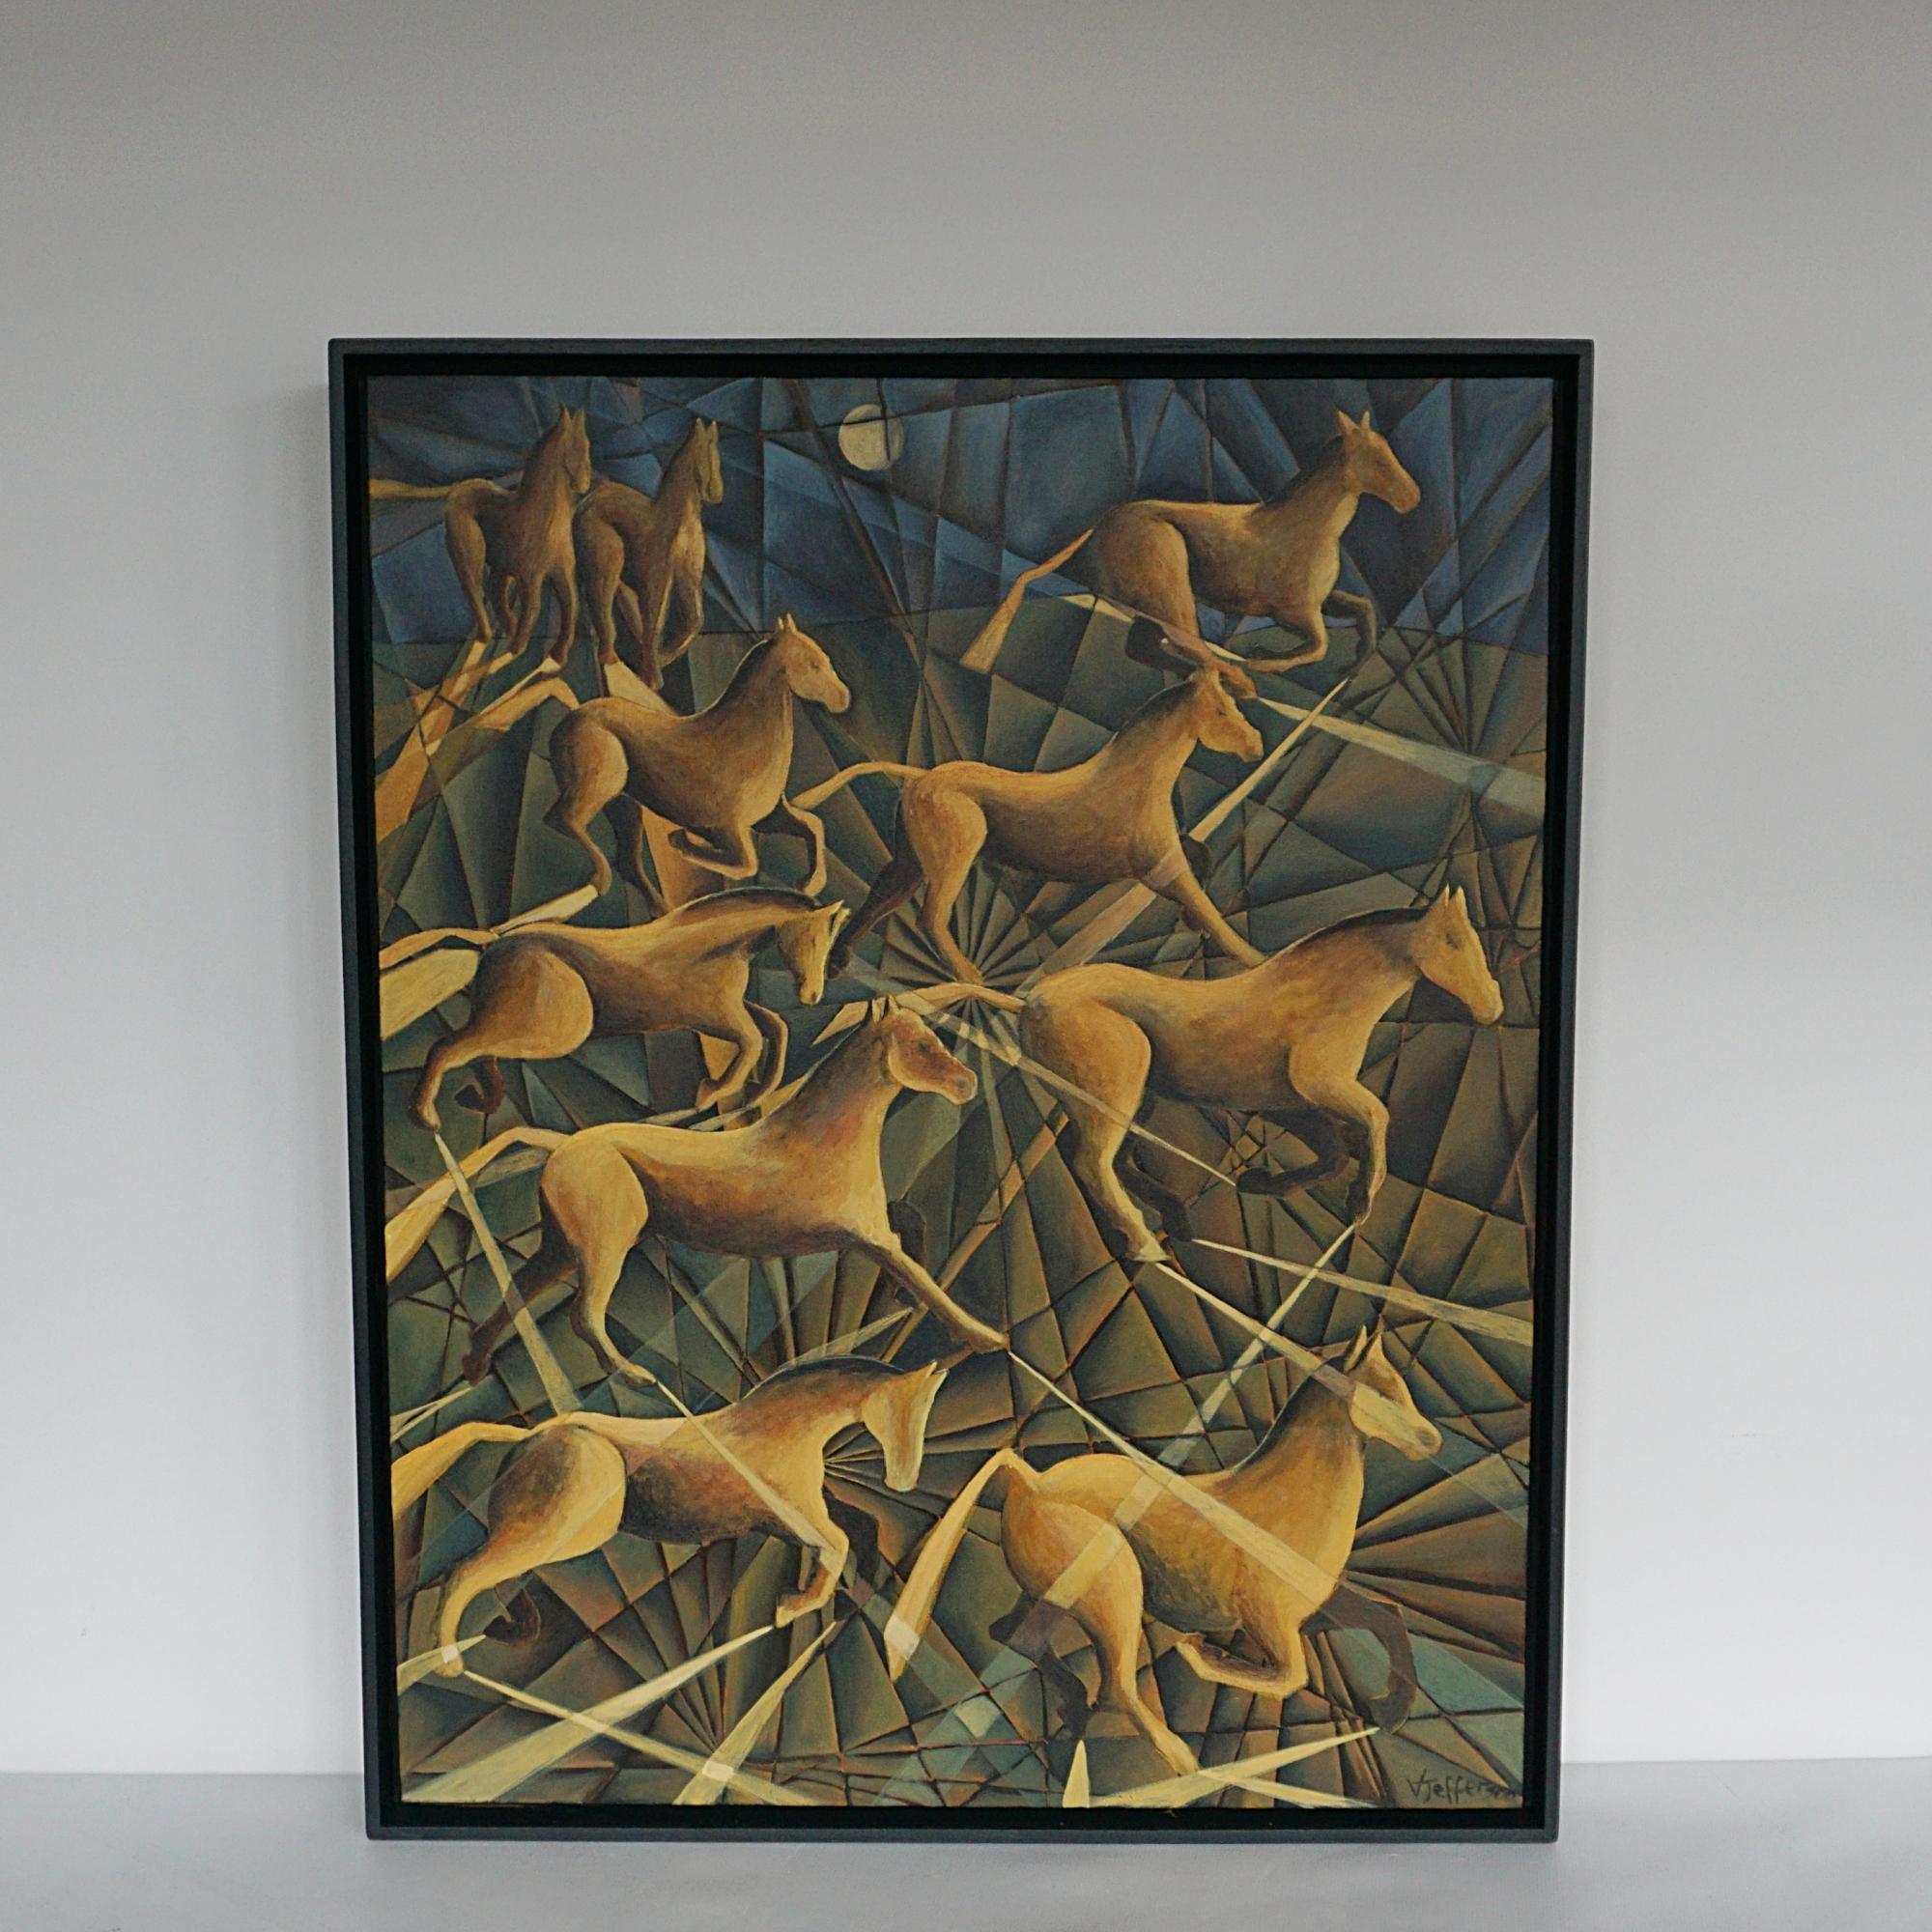 'Moonlight Canter' An Art Deco Style Contemporary painting by Vera Jefferson depicting a group of galloping horses, set against a stylised, abstract background. Signed 'V Jefferson' to lower right. 

Dimensions: H 80cm W 63 D 5cm

 Vera Jefferson